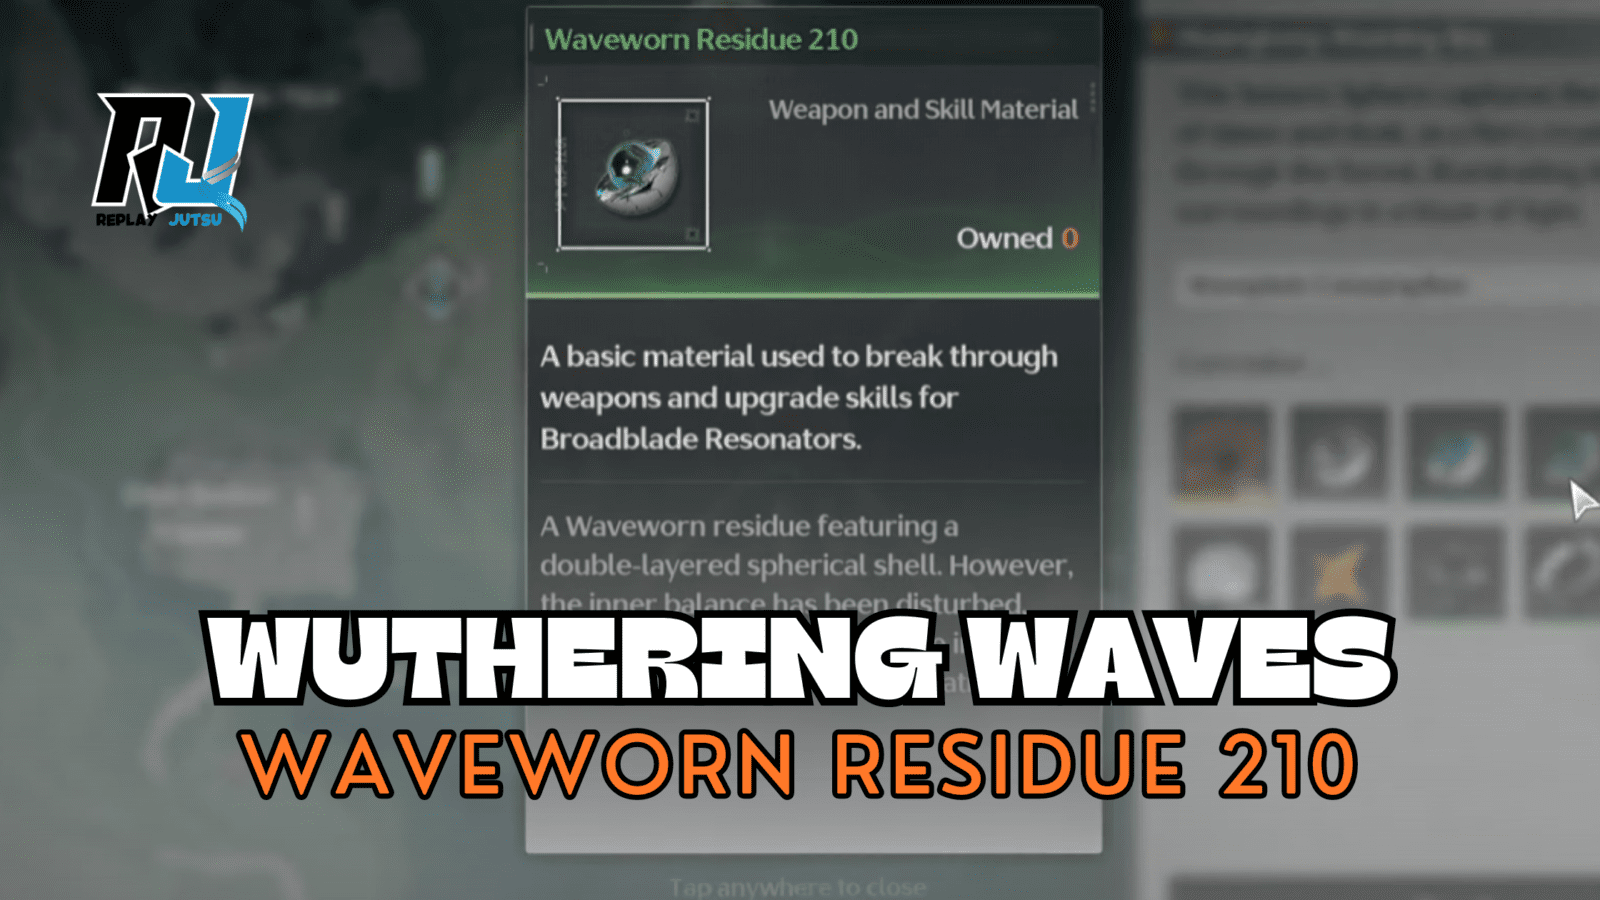 How To Find Waveworn Residue 210 in Wuthering Waves